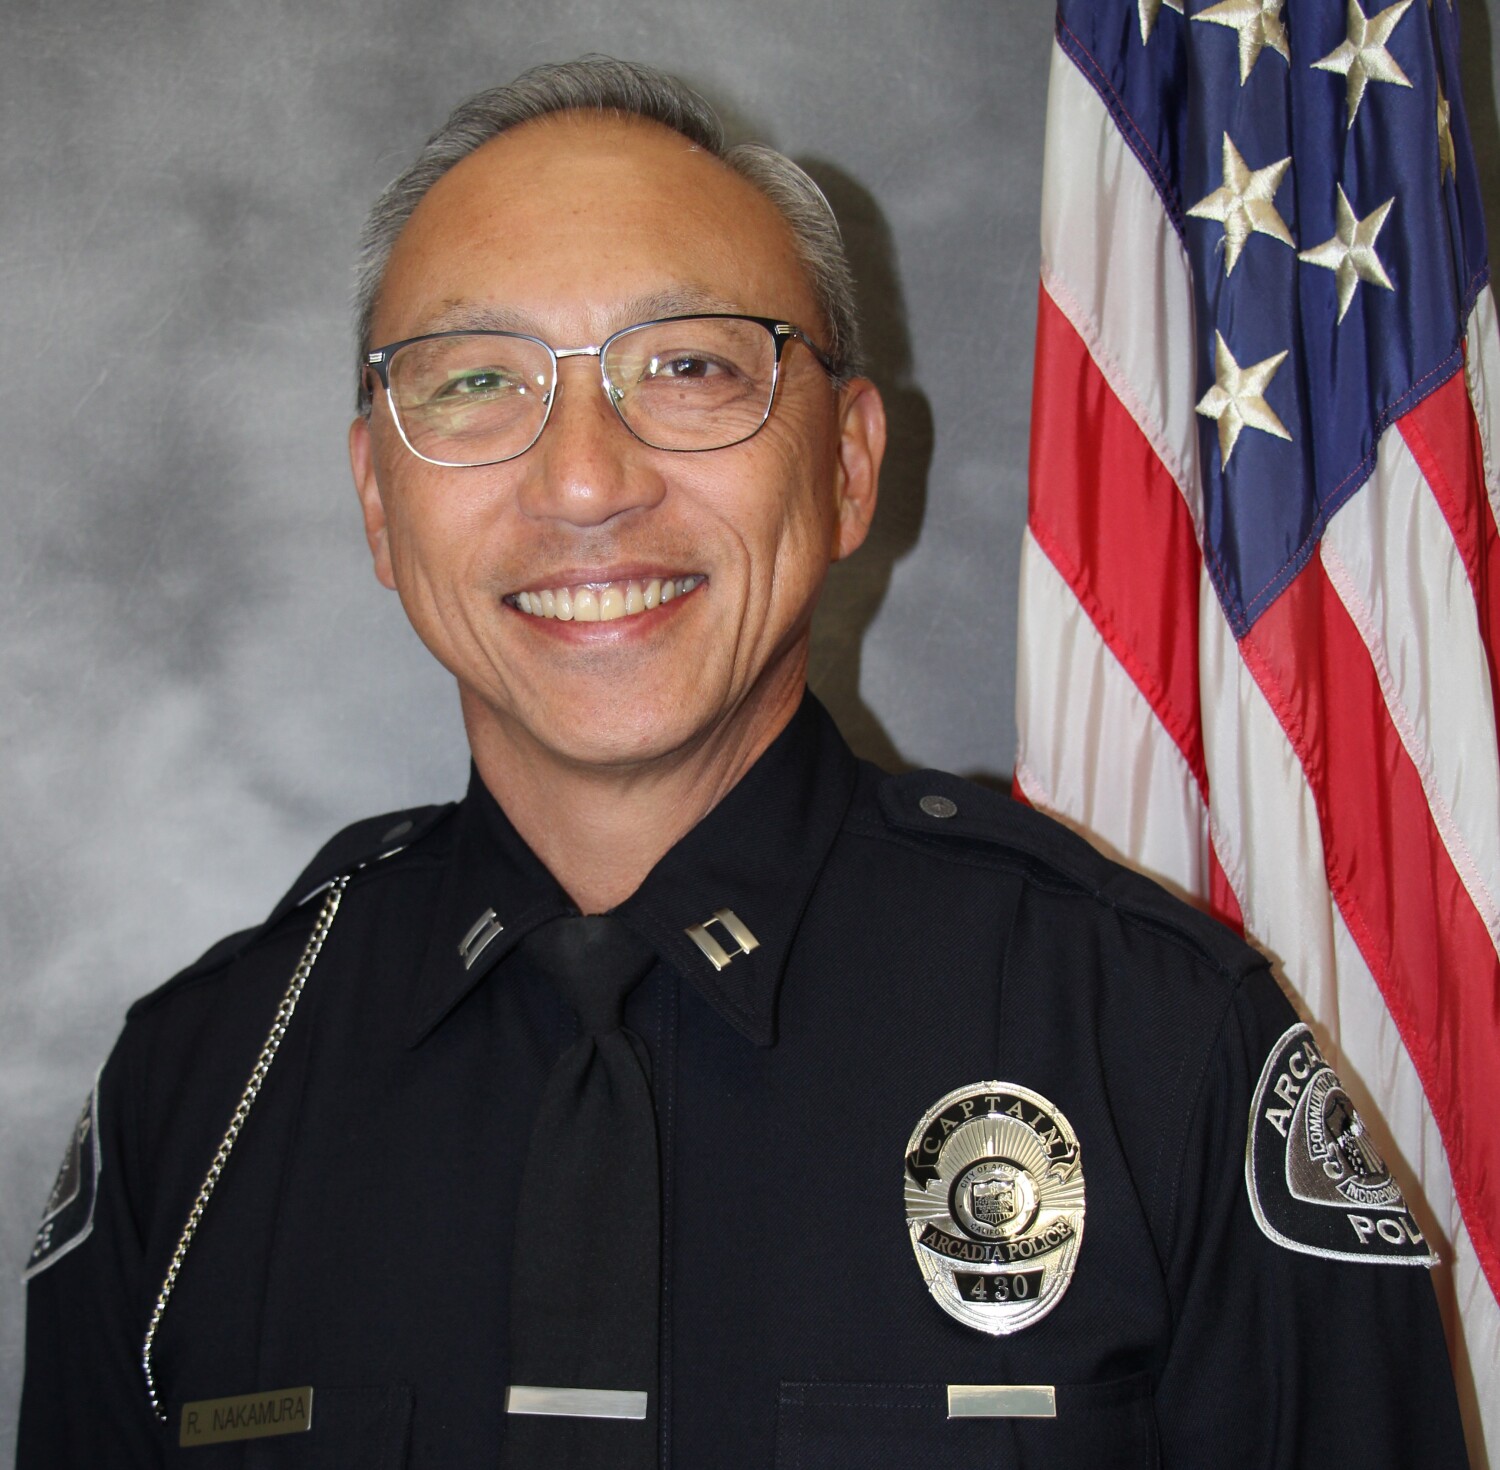 Arcadia, a WWII incarceration site, names its first police chief of Japanese descent